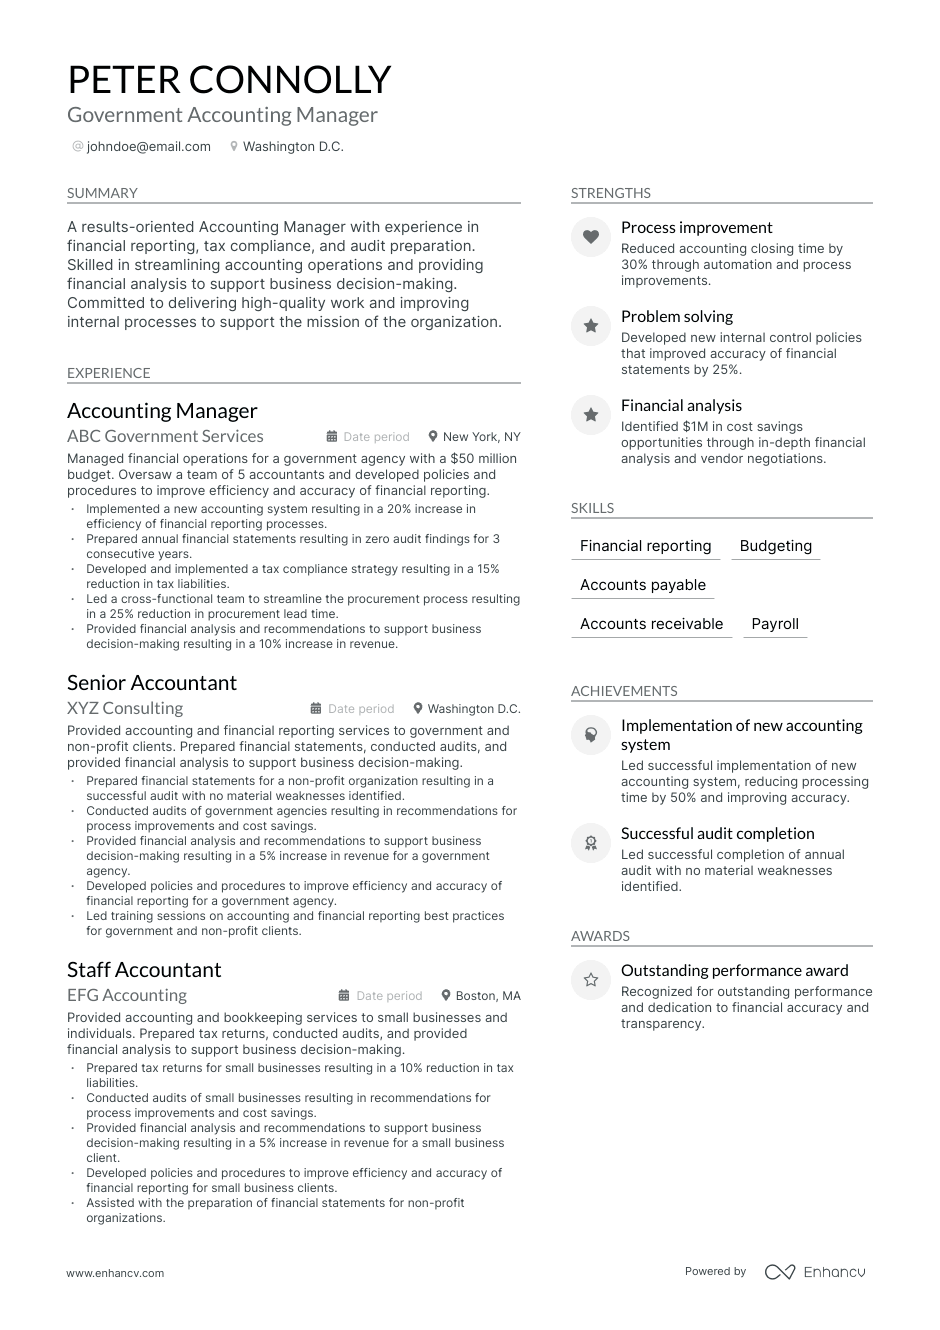 Government accountant resume example